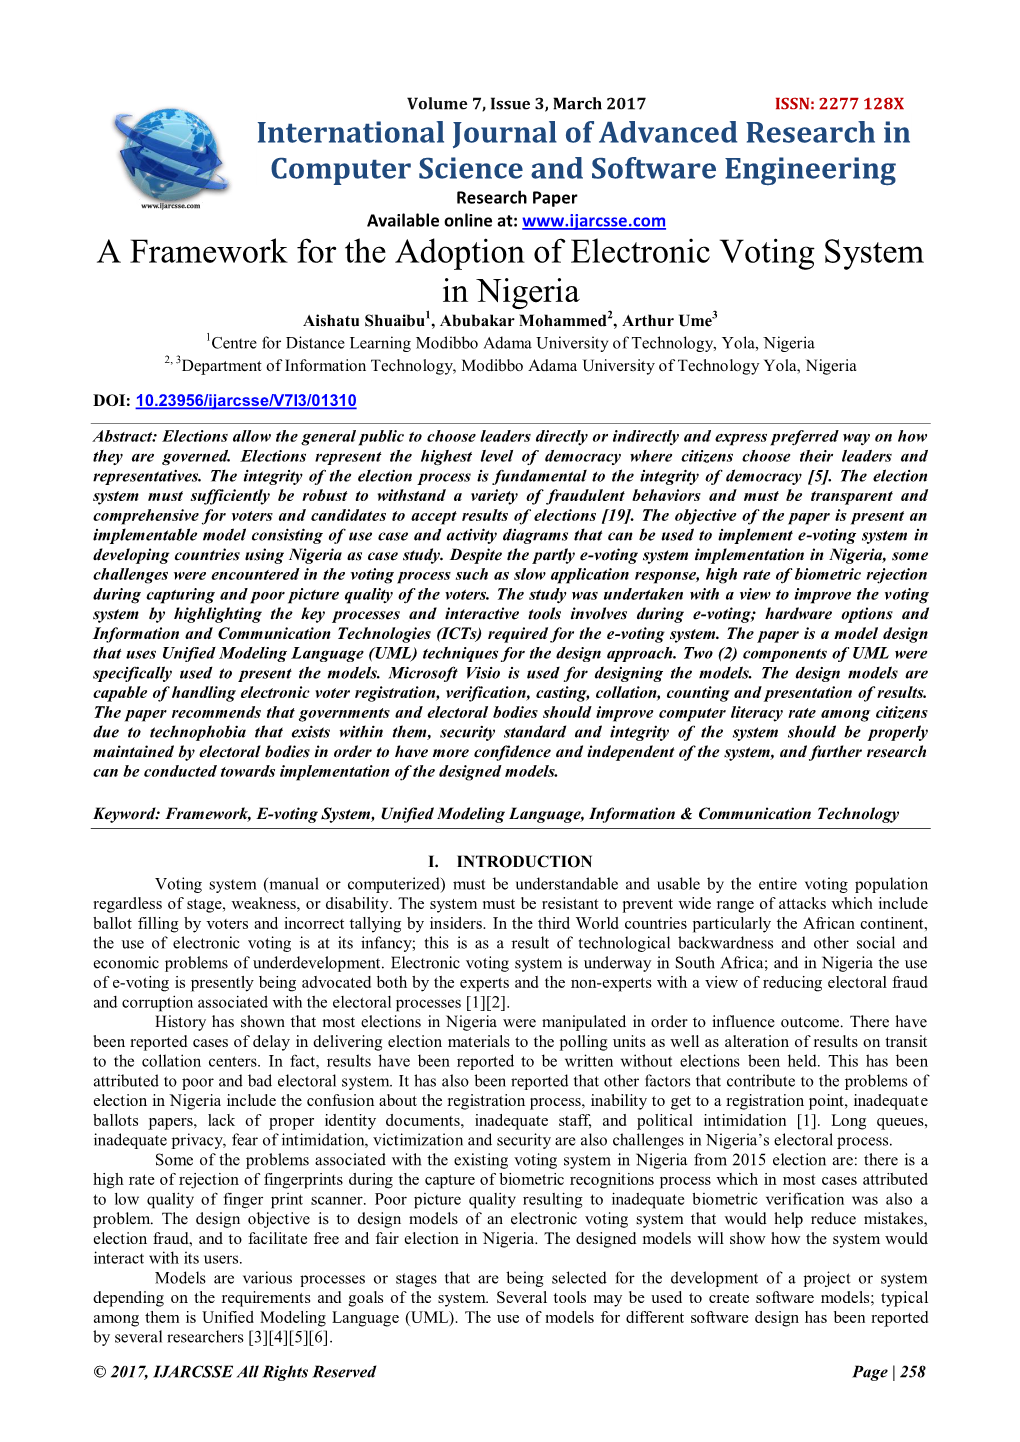 A Framework for the Adoption of Electronic Voting System in Nigeria